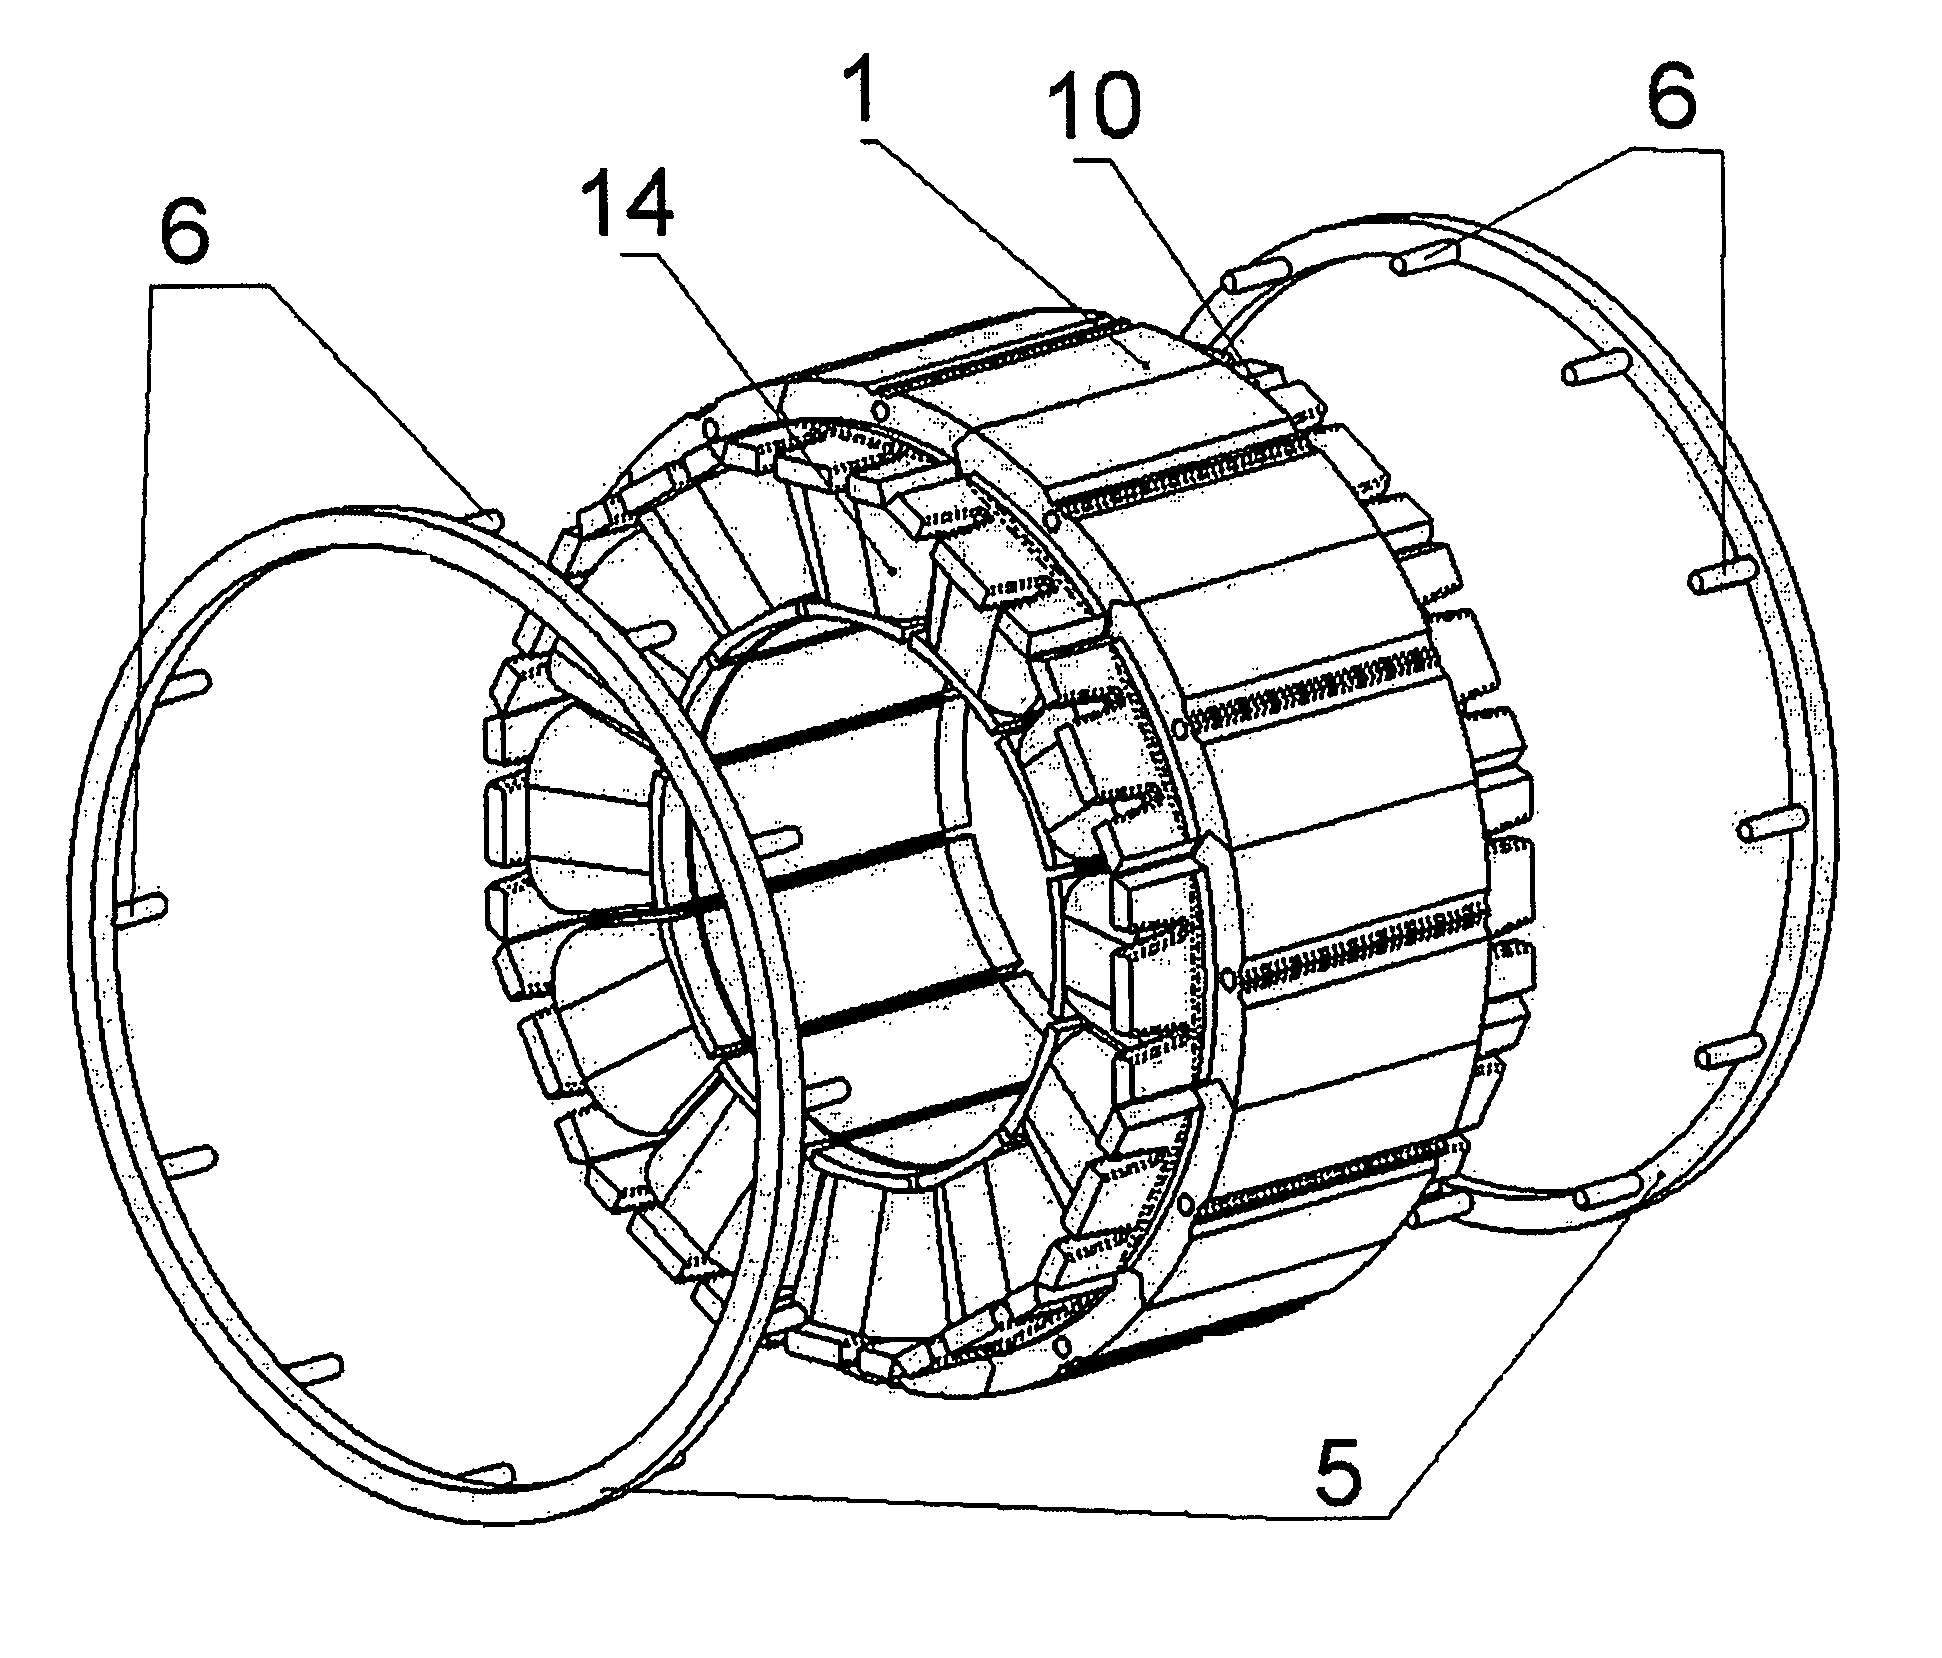 Electric motor and method for manufacturing an electric motor